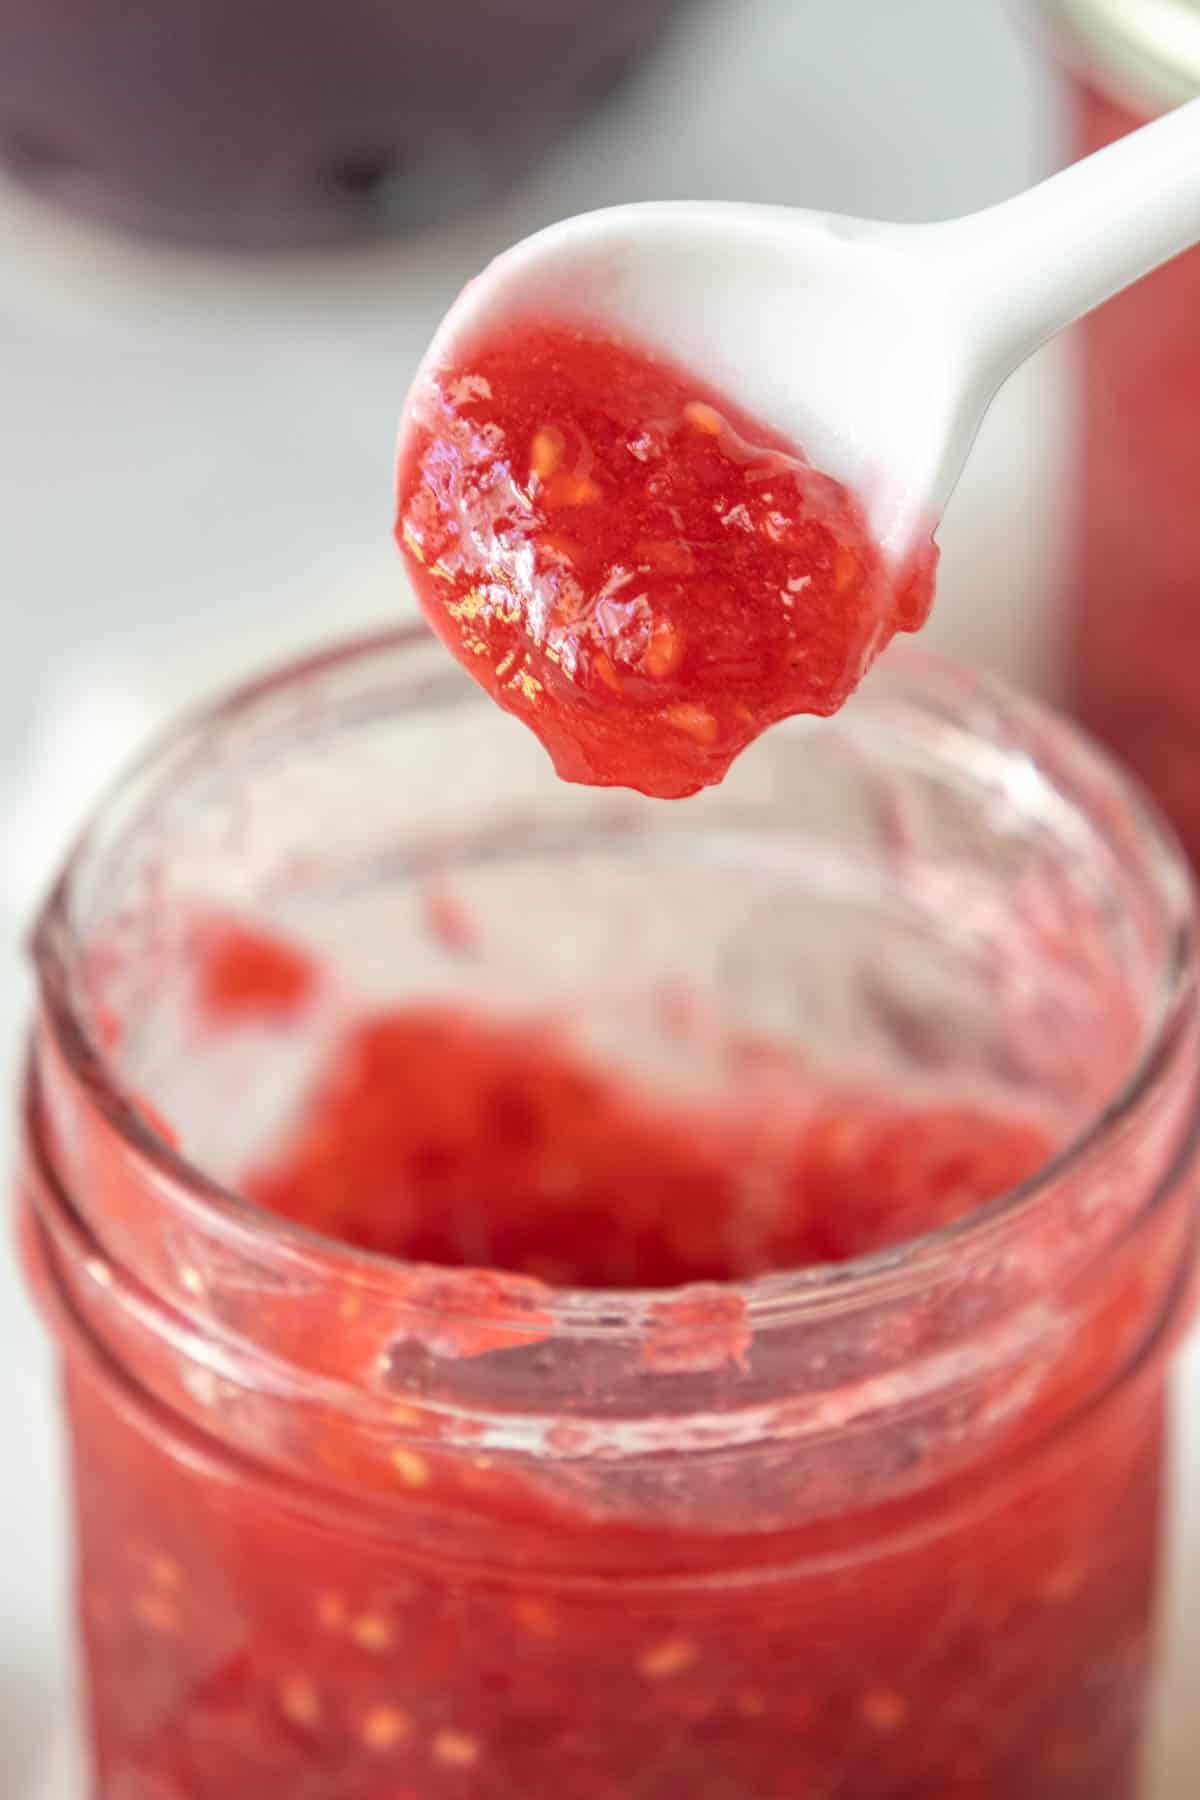 Raspberry jam in a jar with a spoon.